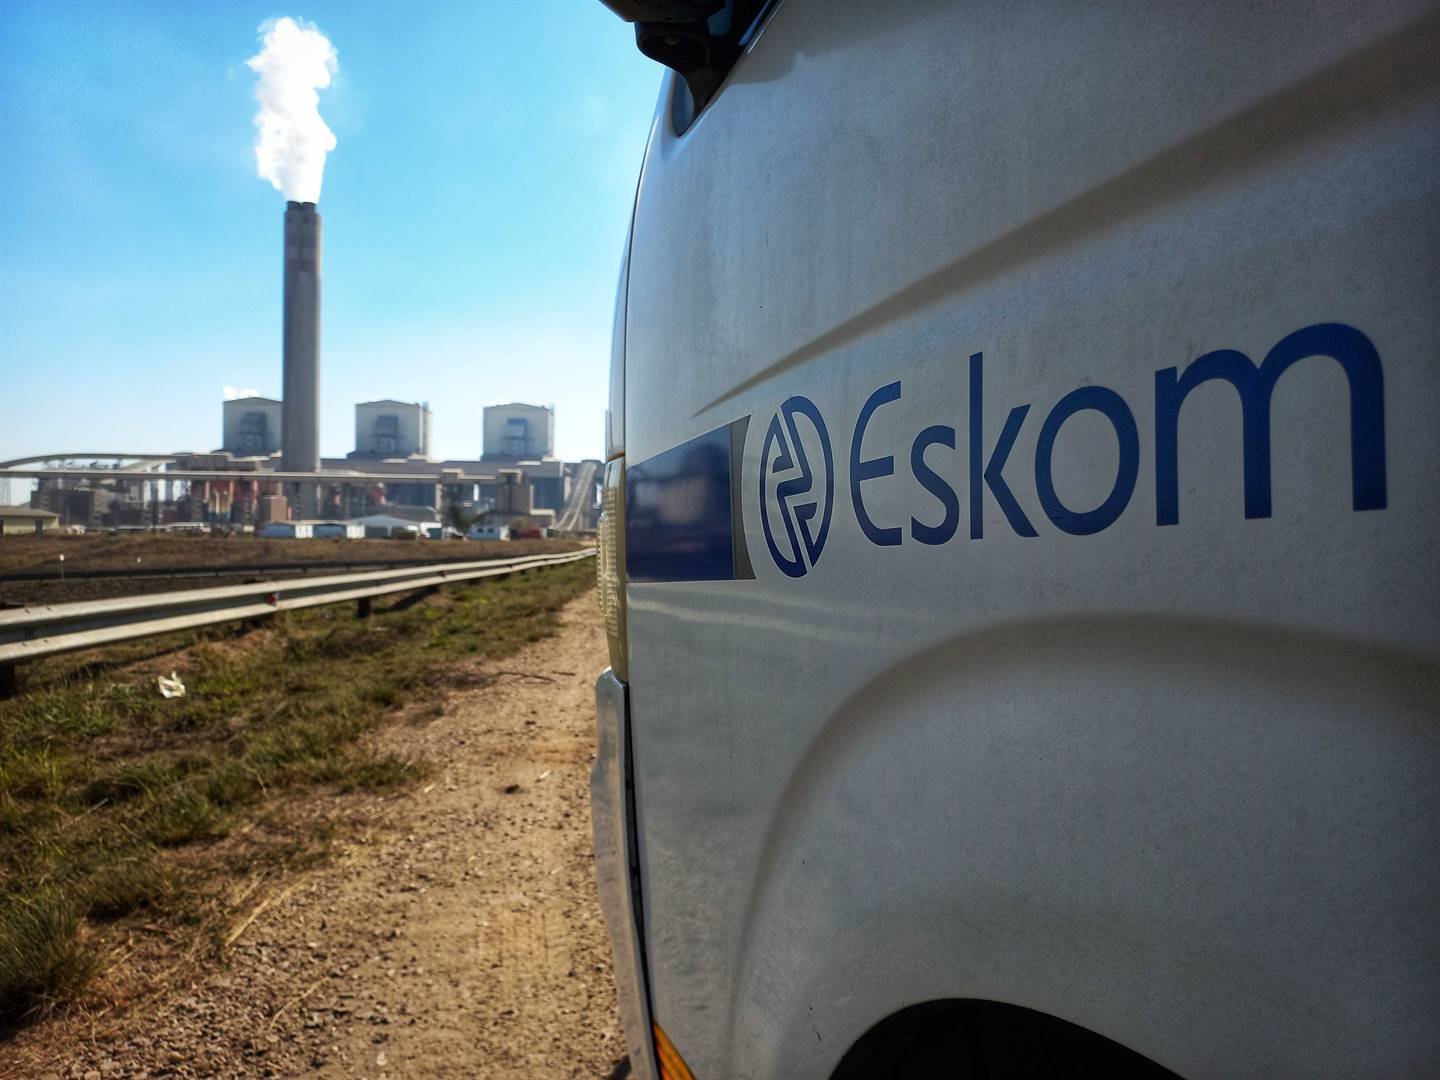 Eskom is one step closer to having to pay interest on the debt relief funding it receives from National Treasury.